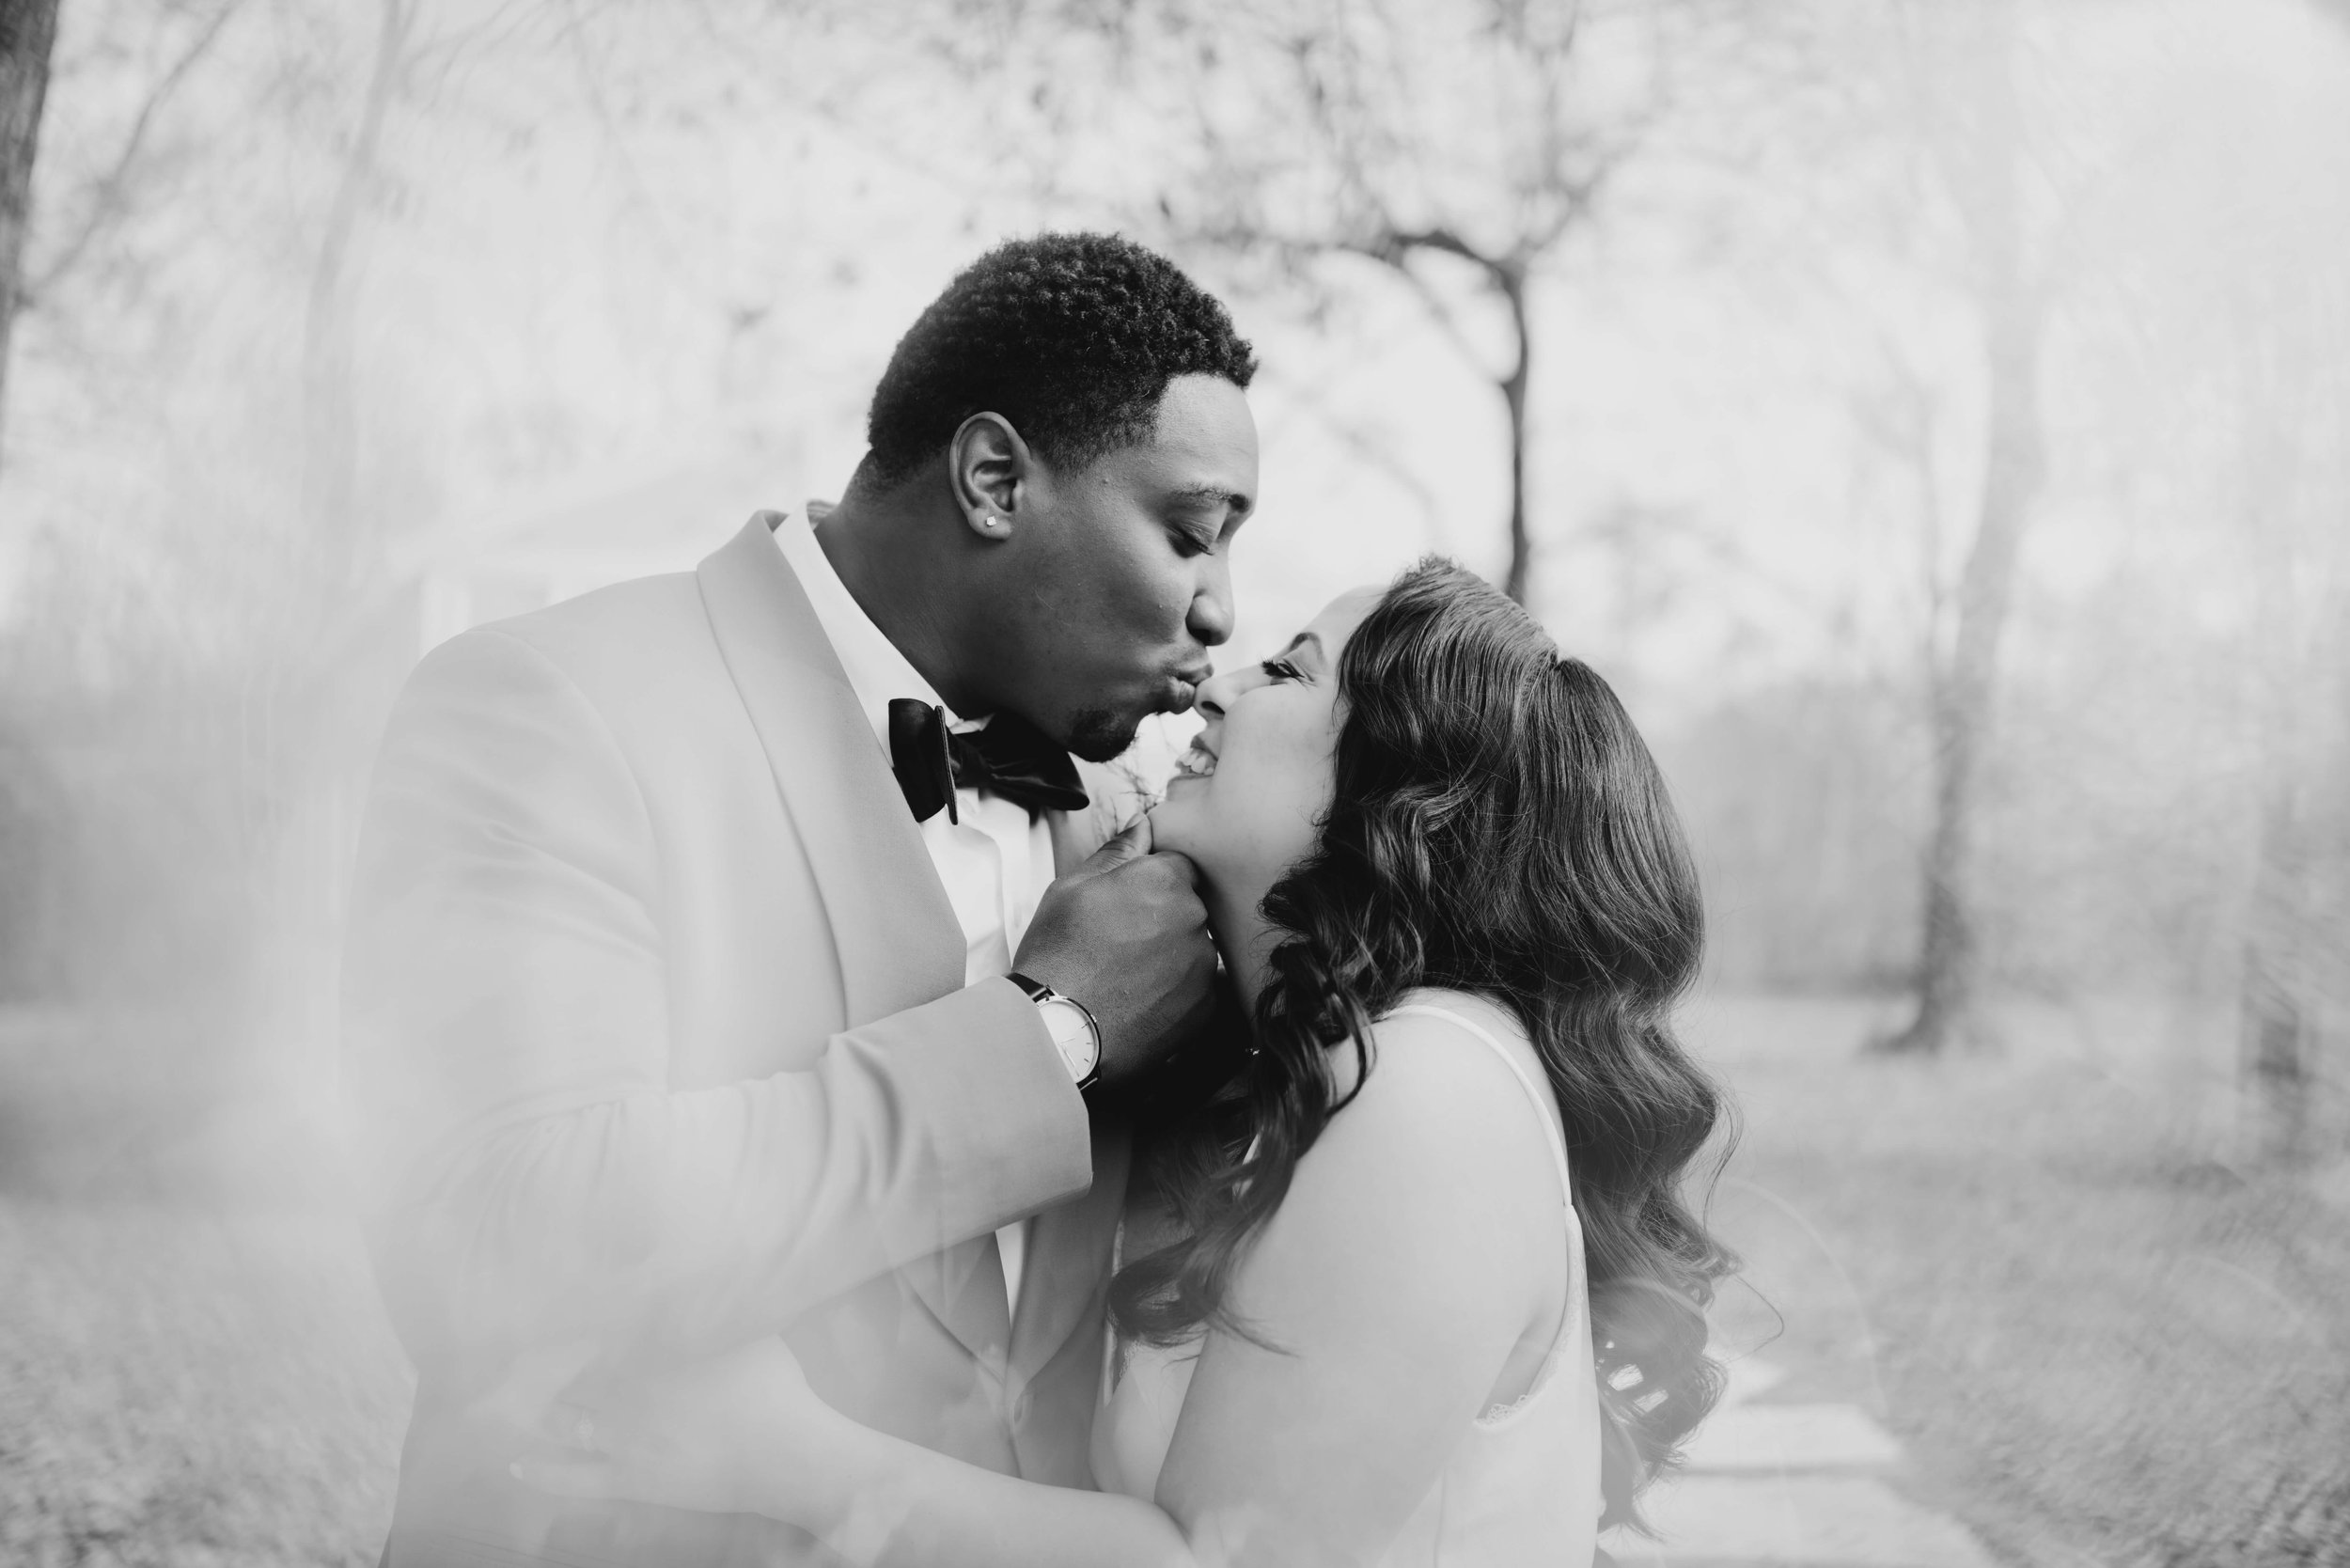 Houston Area Elopement Photos at The Oak Atelier photographed by J. Andrade Visual Arts